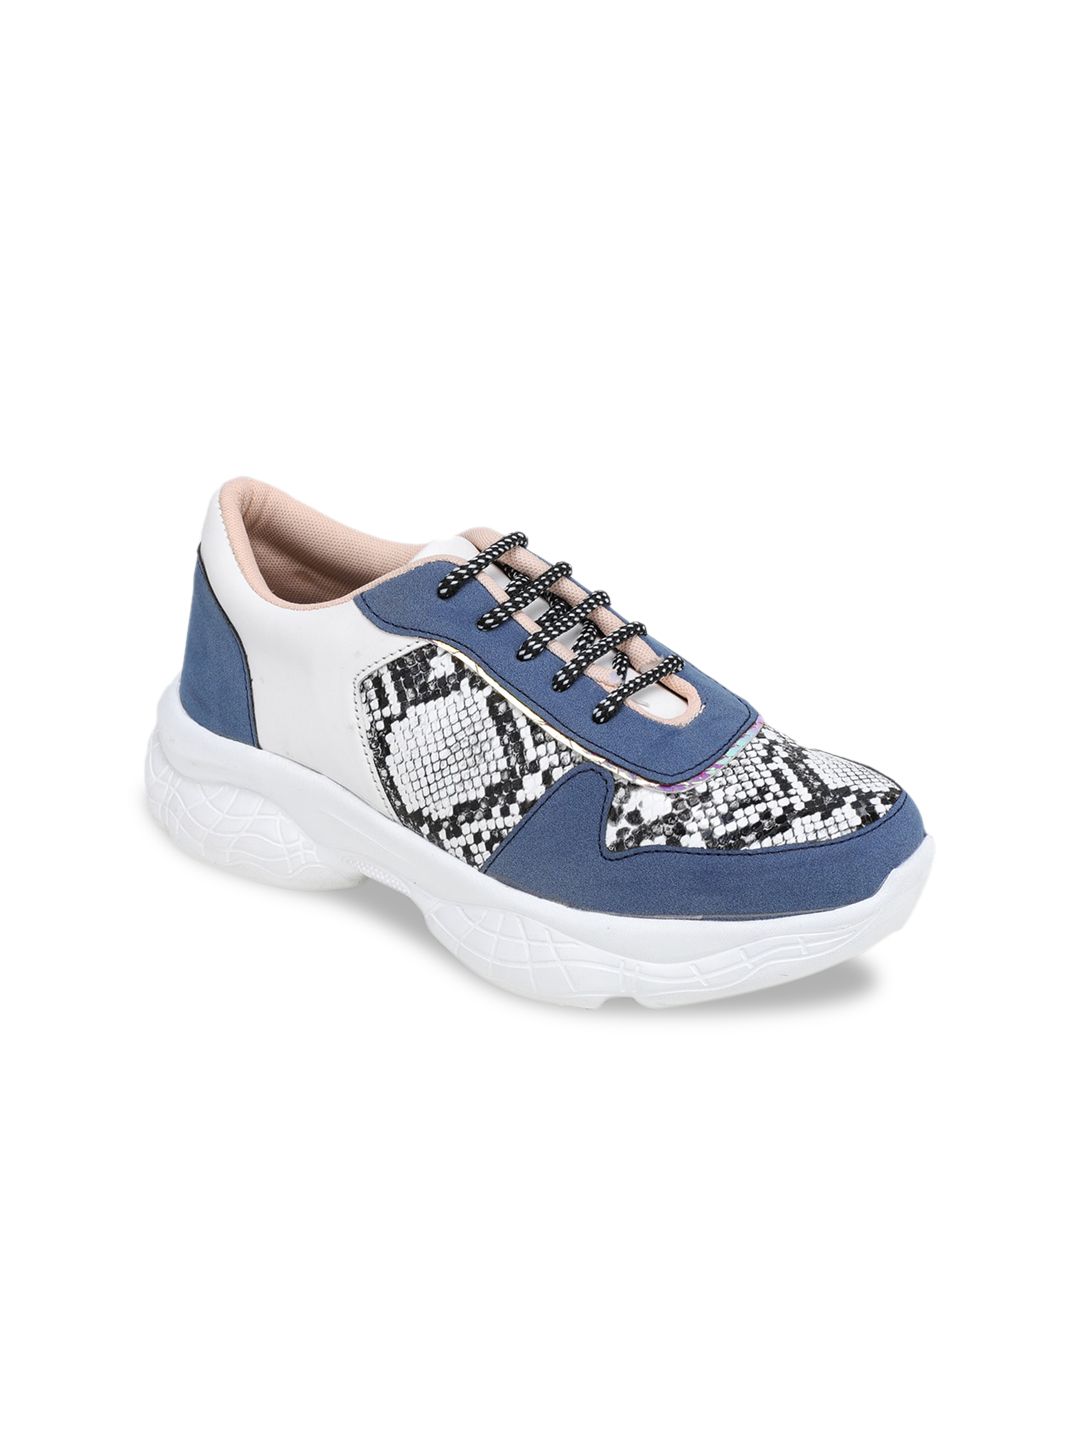 TRASE Women White & Blue Printed Sneakers Price in India